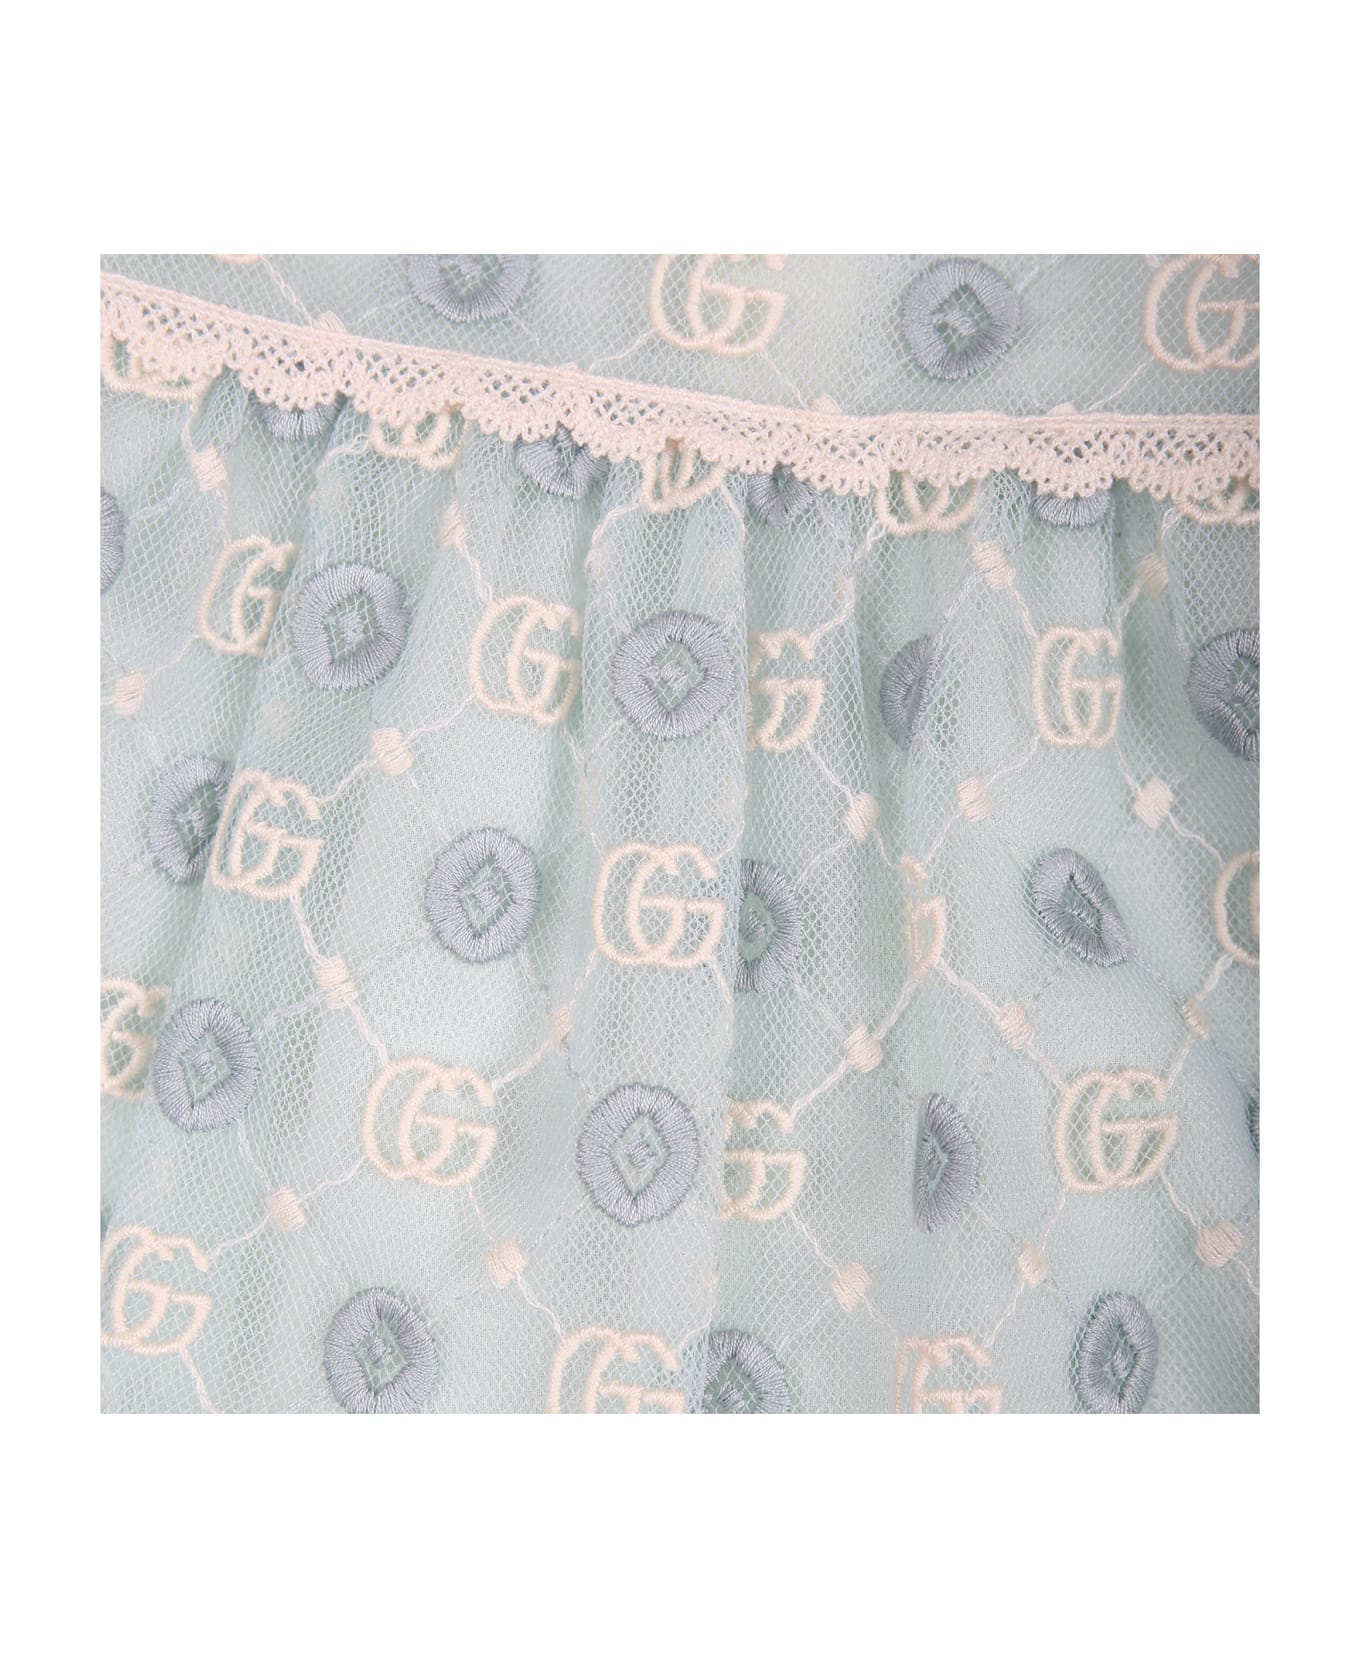 Gucci Light Blue Dress For Baby Girl With Geometric Pattern And Double G - Light Blue